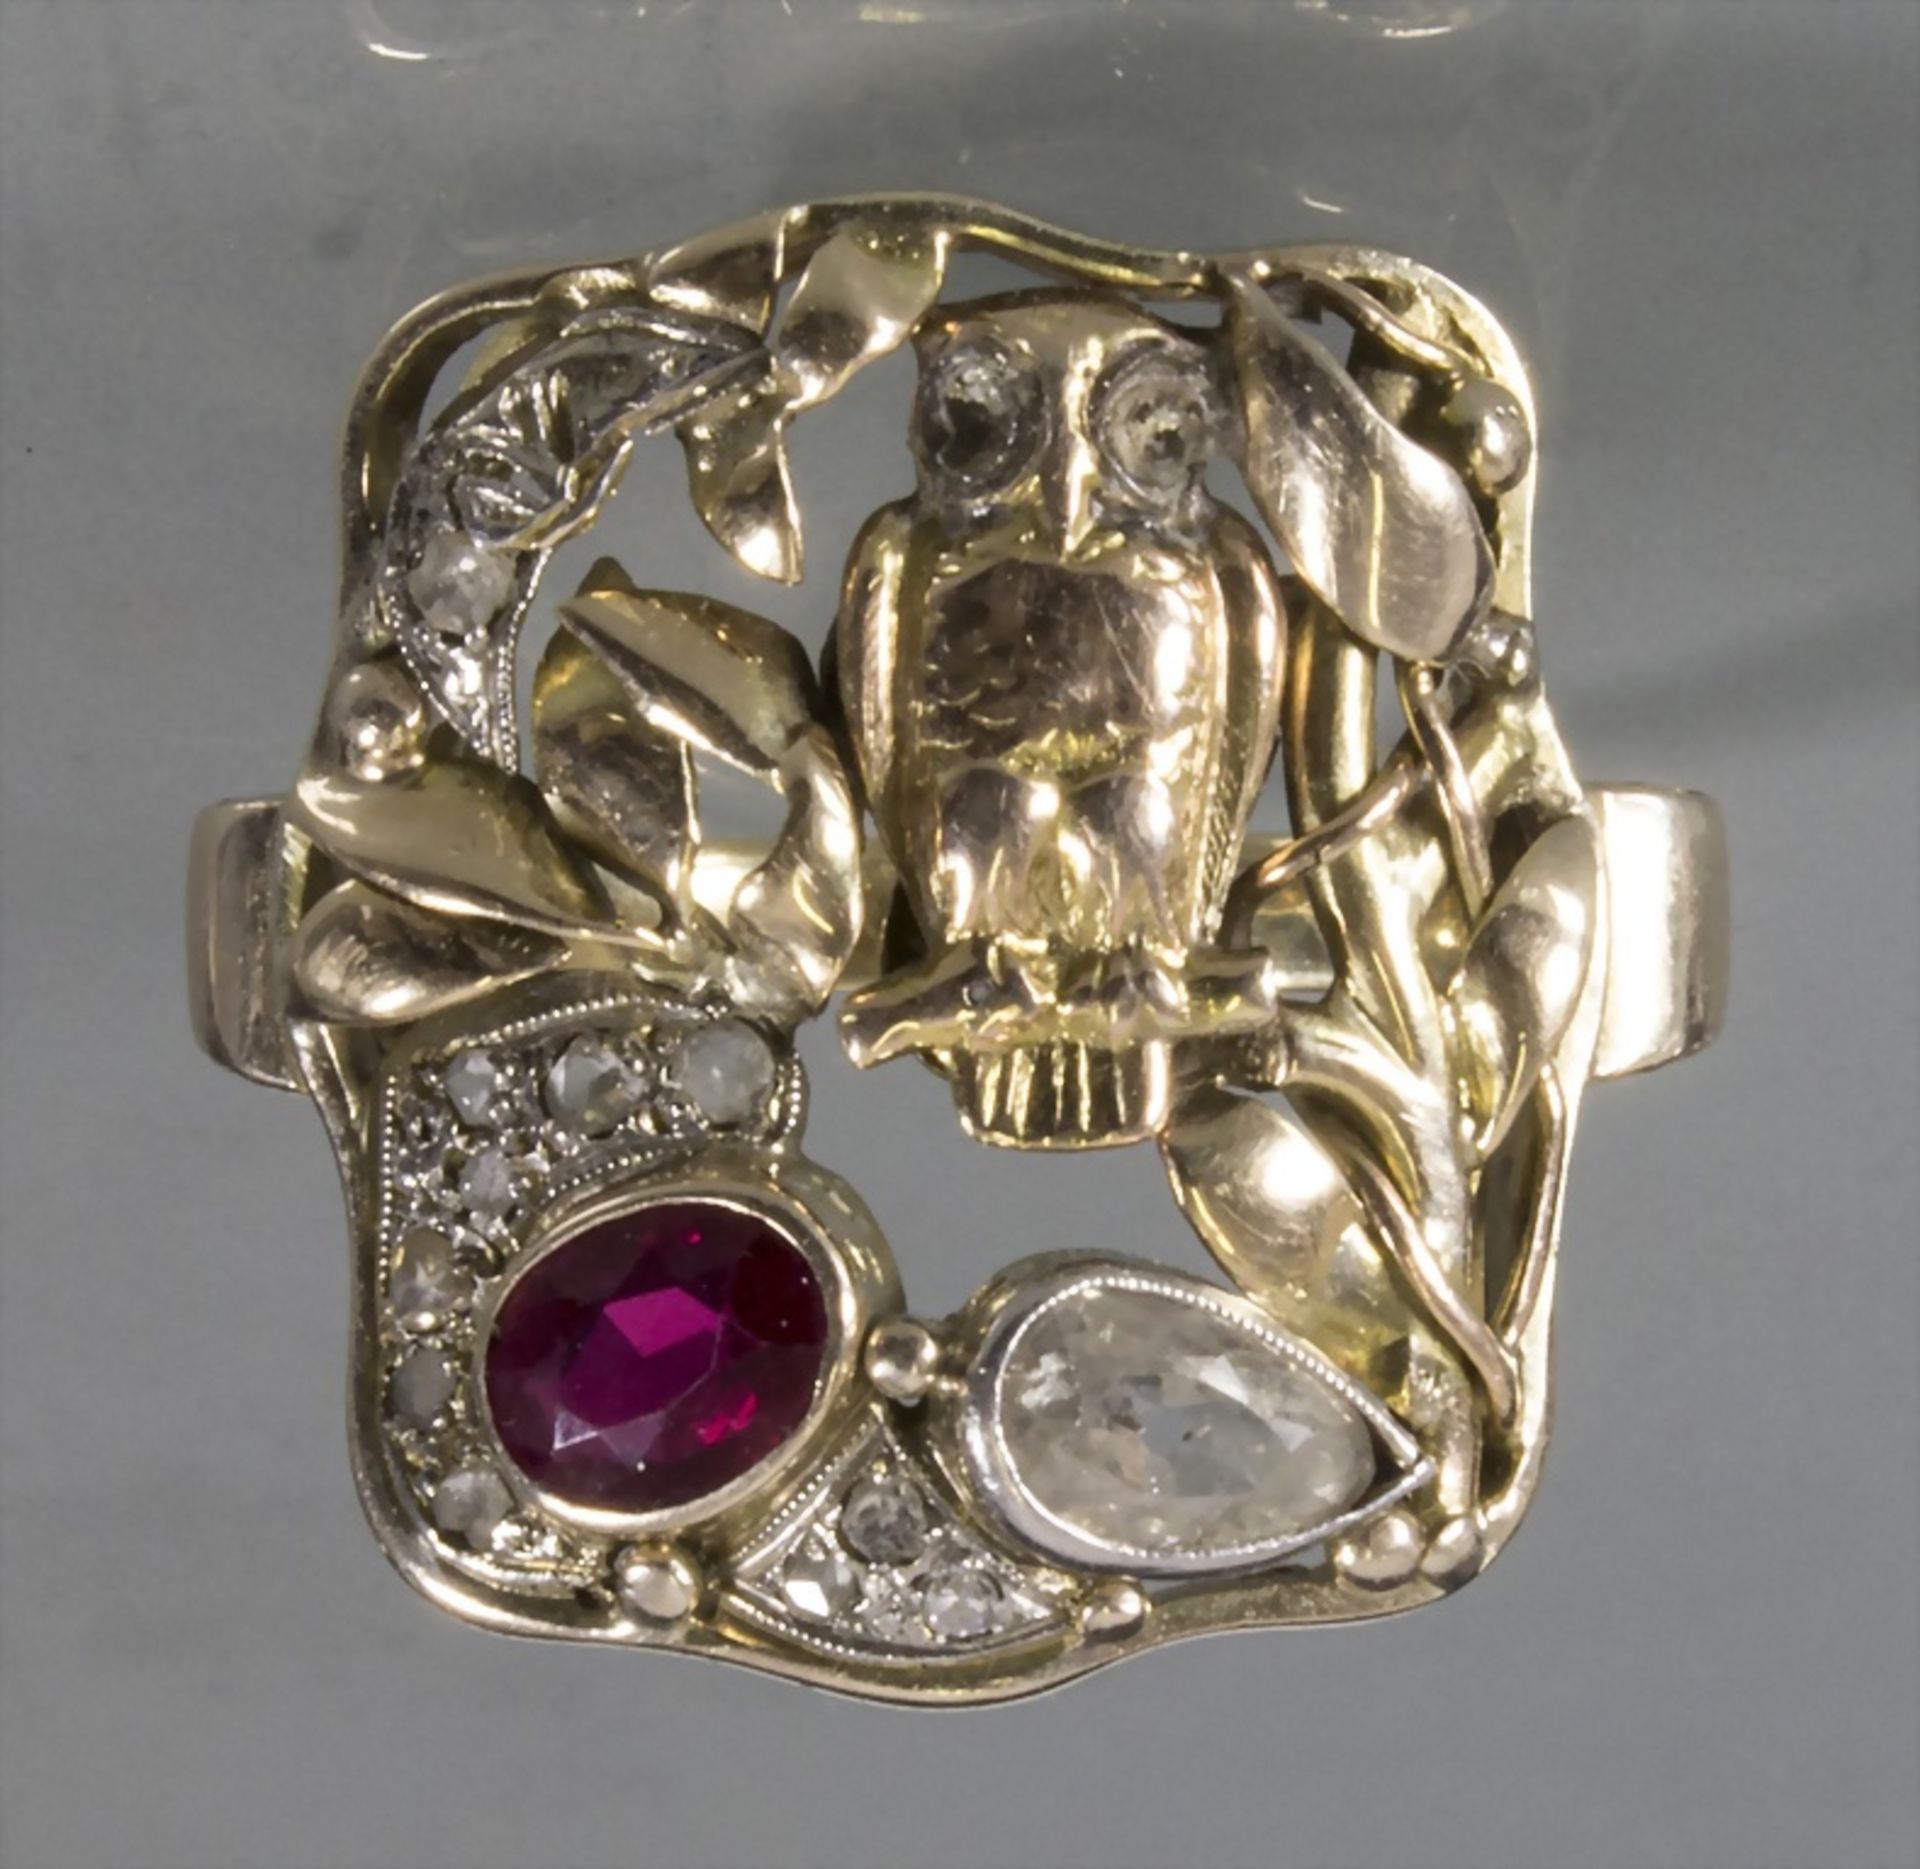 Damenring / A ladies 14ct gold ring with diamond and ruby, um 1930